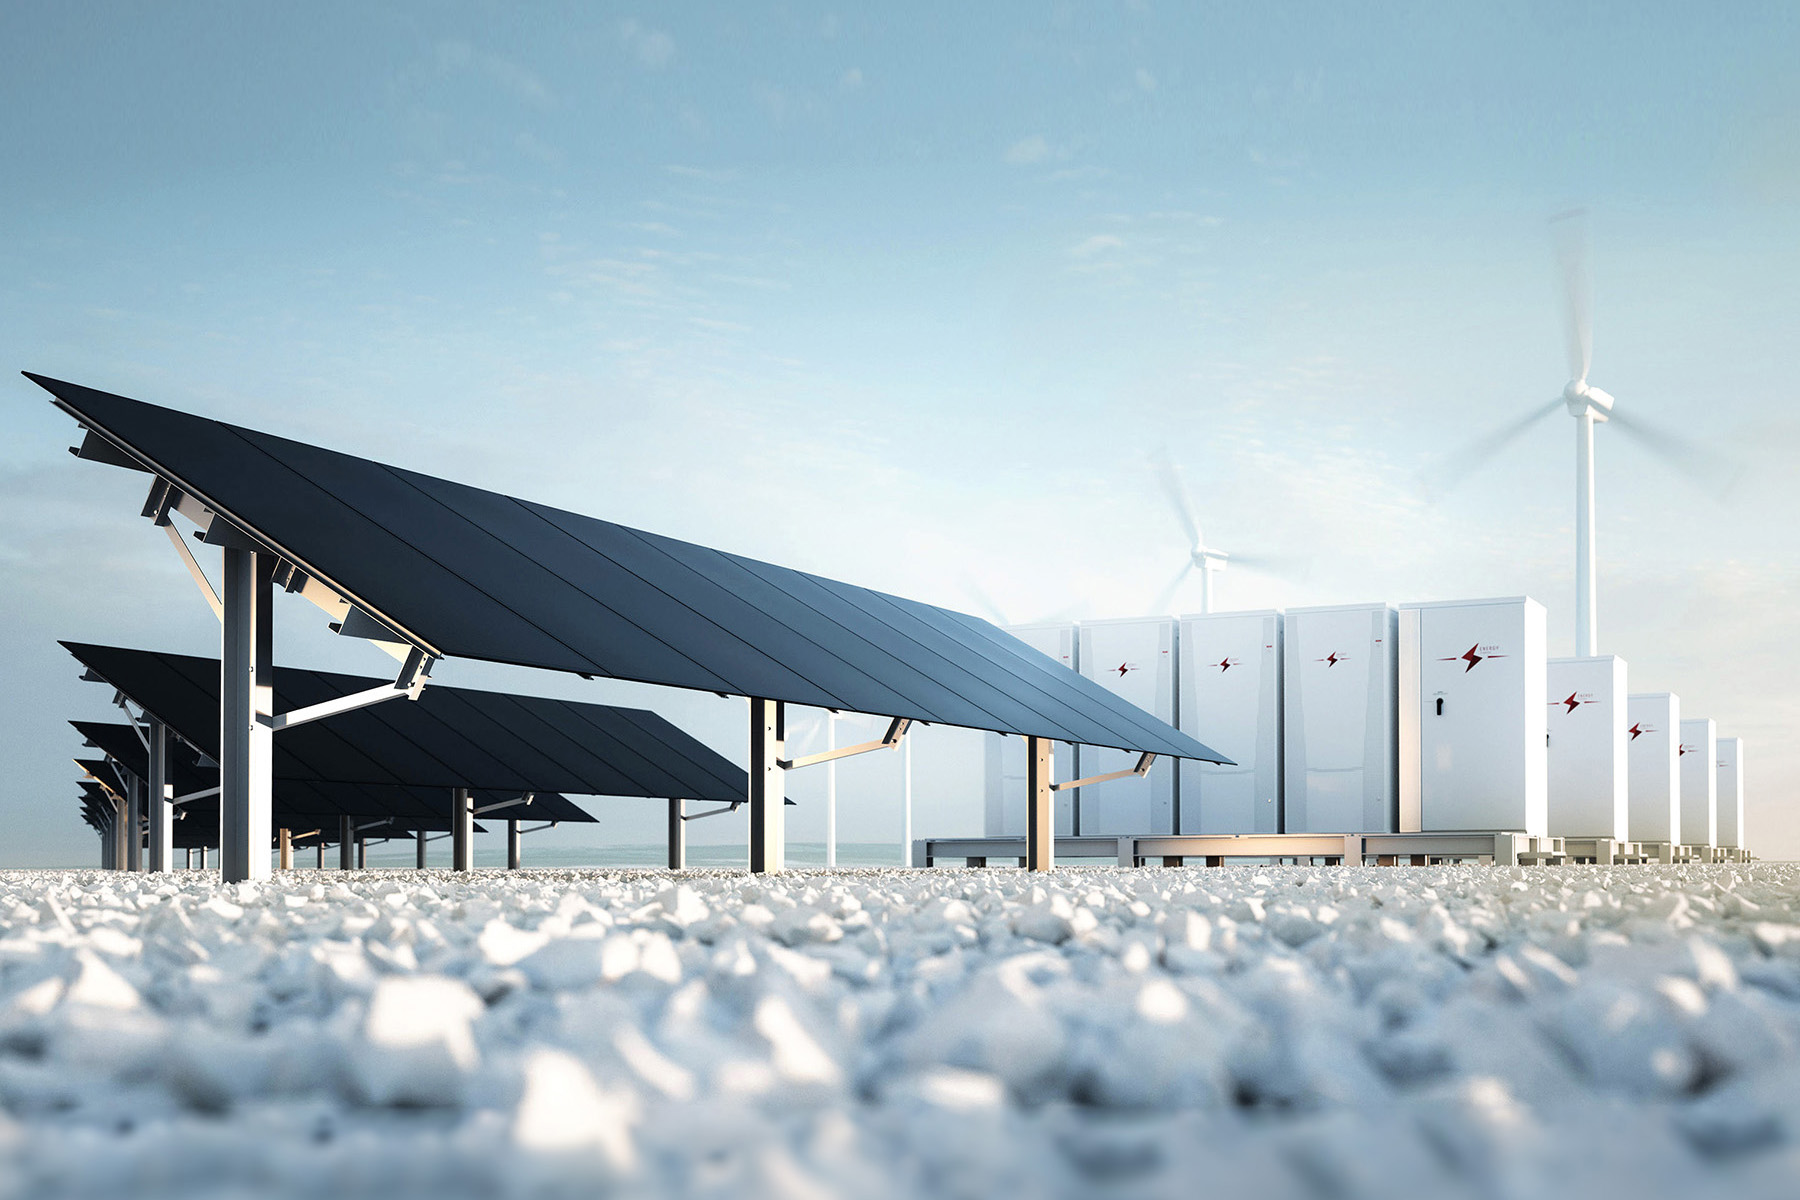 Solar panels, battery storage units and wind turbines on a white stone beach